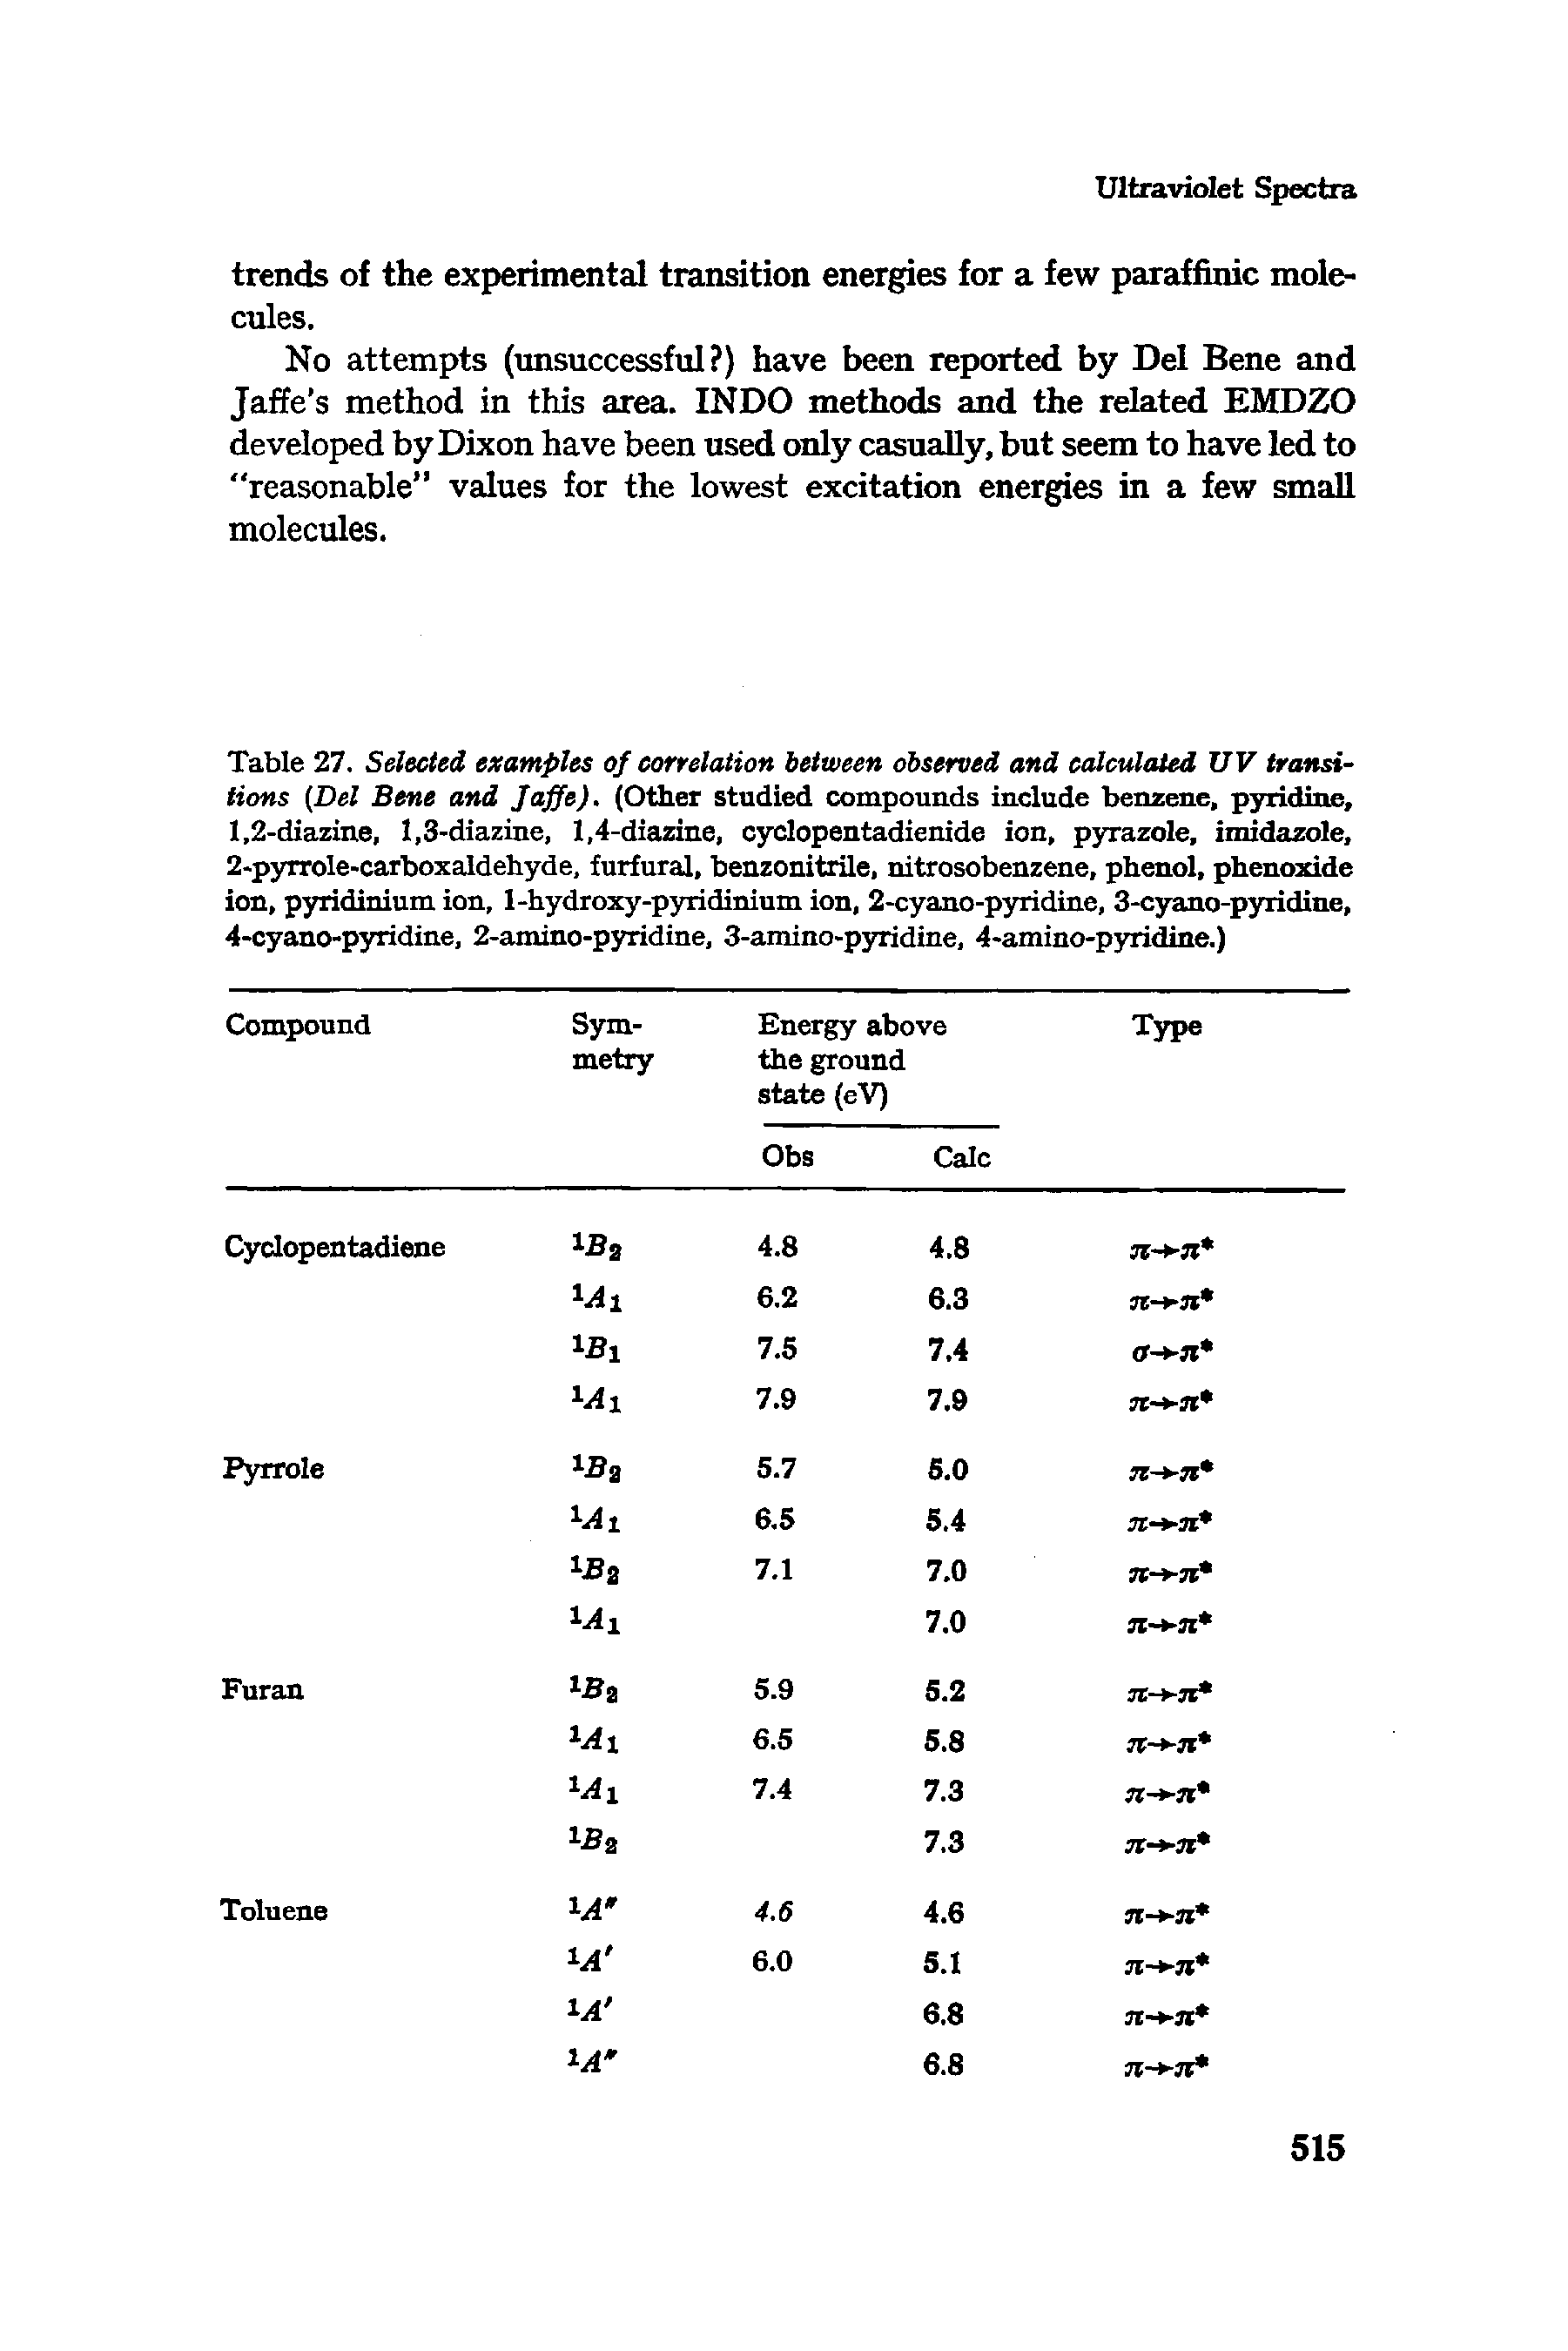 Table 27. Selected examples of correlation between observed and calculated UV transitions (Del Bene and Jaffe). (Other studied compounds include benzene, pyridine, 1,2-diazine, 1,3-diazine, 1,4-diazine, cyclopentadienide ion, pyrazole, imidazole, 2-pyrrole-carboxaldehyde, furfural, benzonitrile, nitrosobenzene, phenol, phenoxide ion, pyridinium ion, 1-hydroxy-pyridinium ion, 2-cyano-pyridine, 3-cyano-pyridine, 4-cyano-pyridine, 2-amino-pyridine, 3-amino-pyridine, 4-amino-pyridine.)...